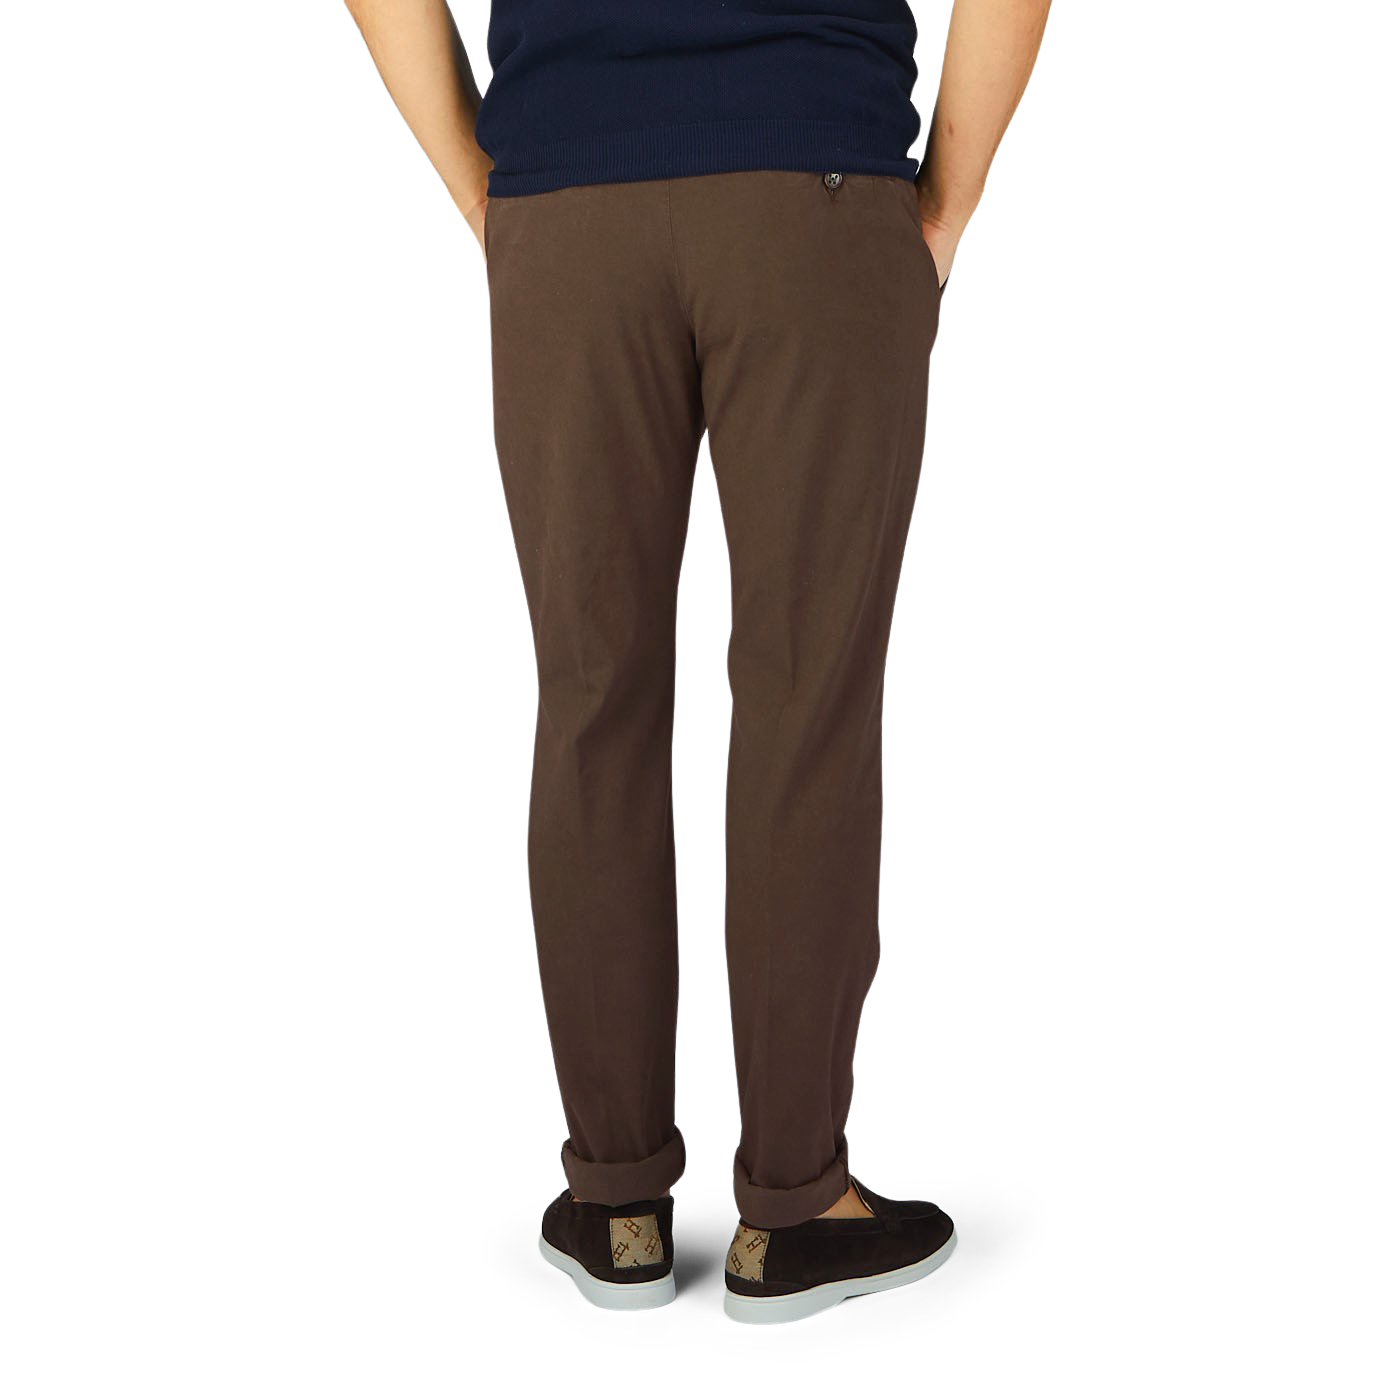 The man is seen from the back in slim-fit Berwich dark brown cotton stretch chinos.